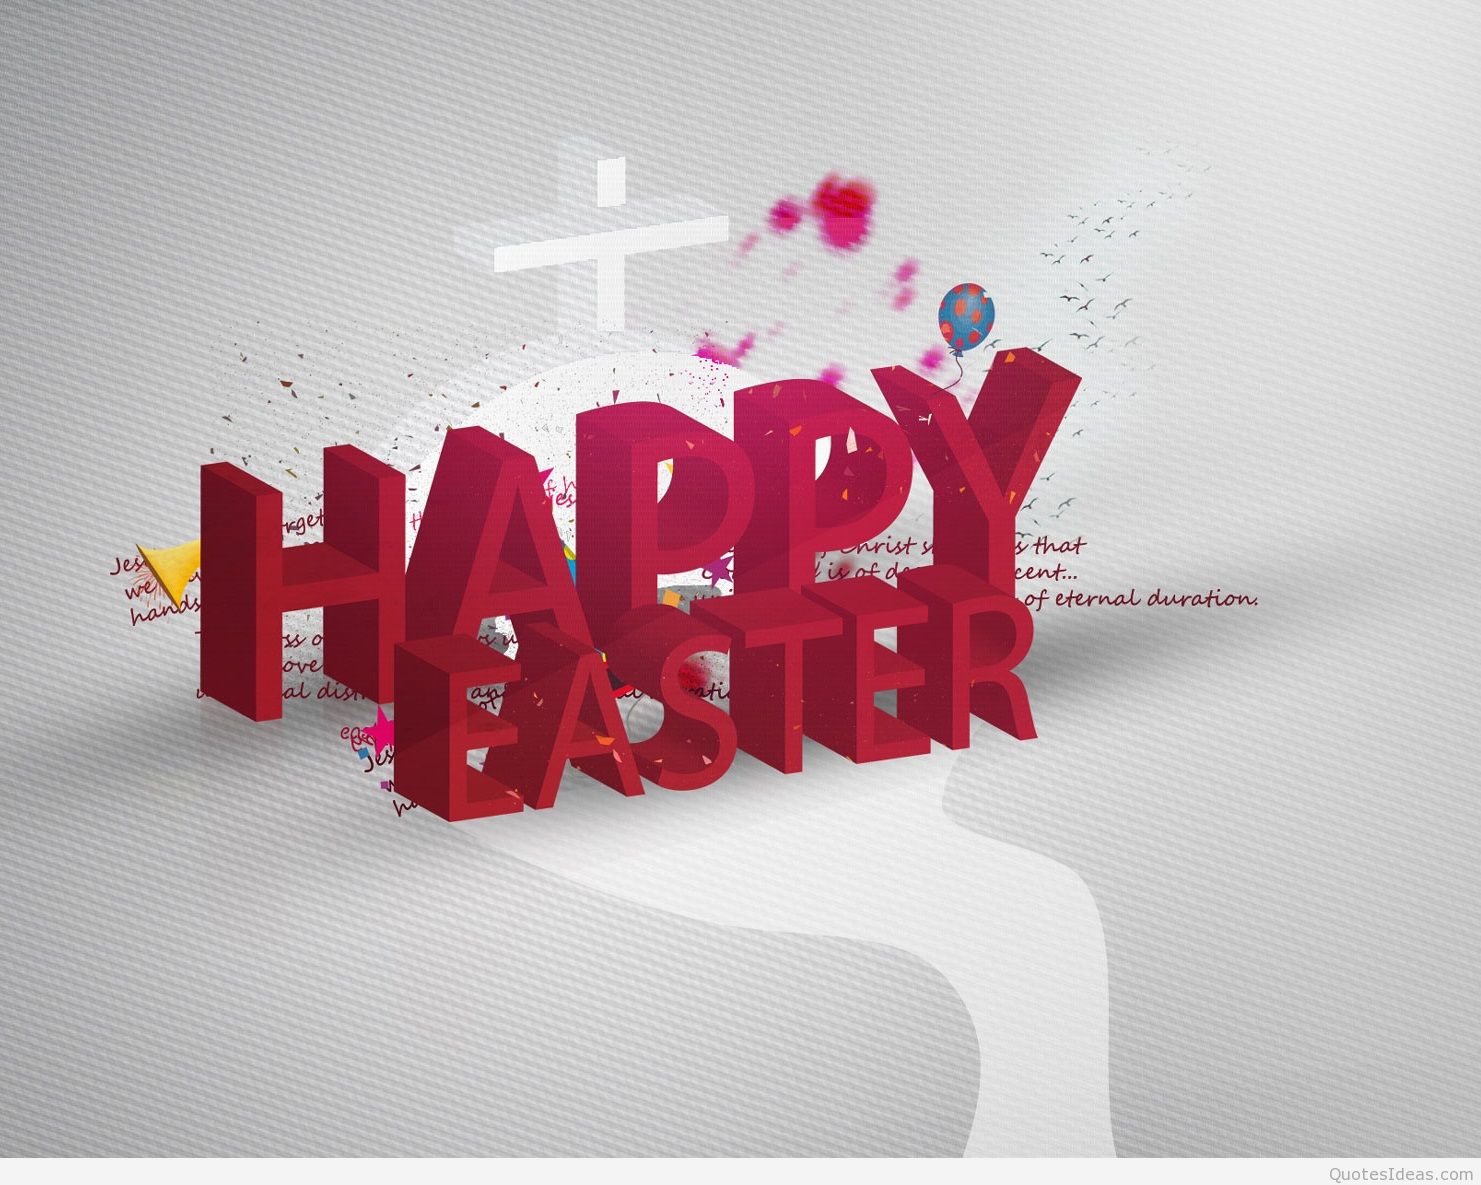 Happy Easter Wallpaper for Phone Mobile